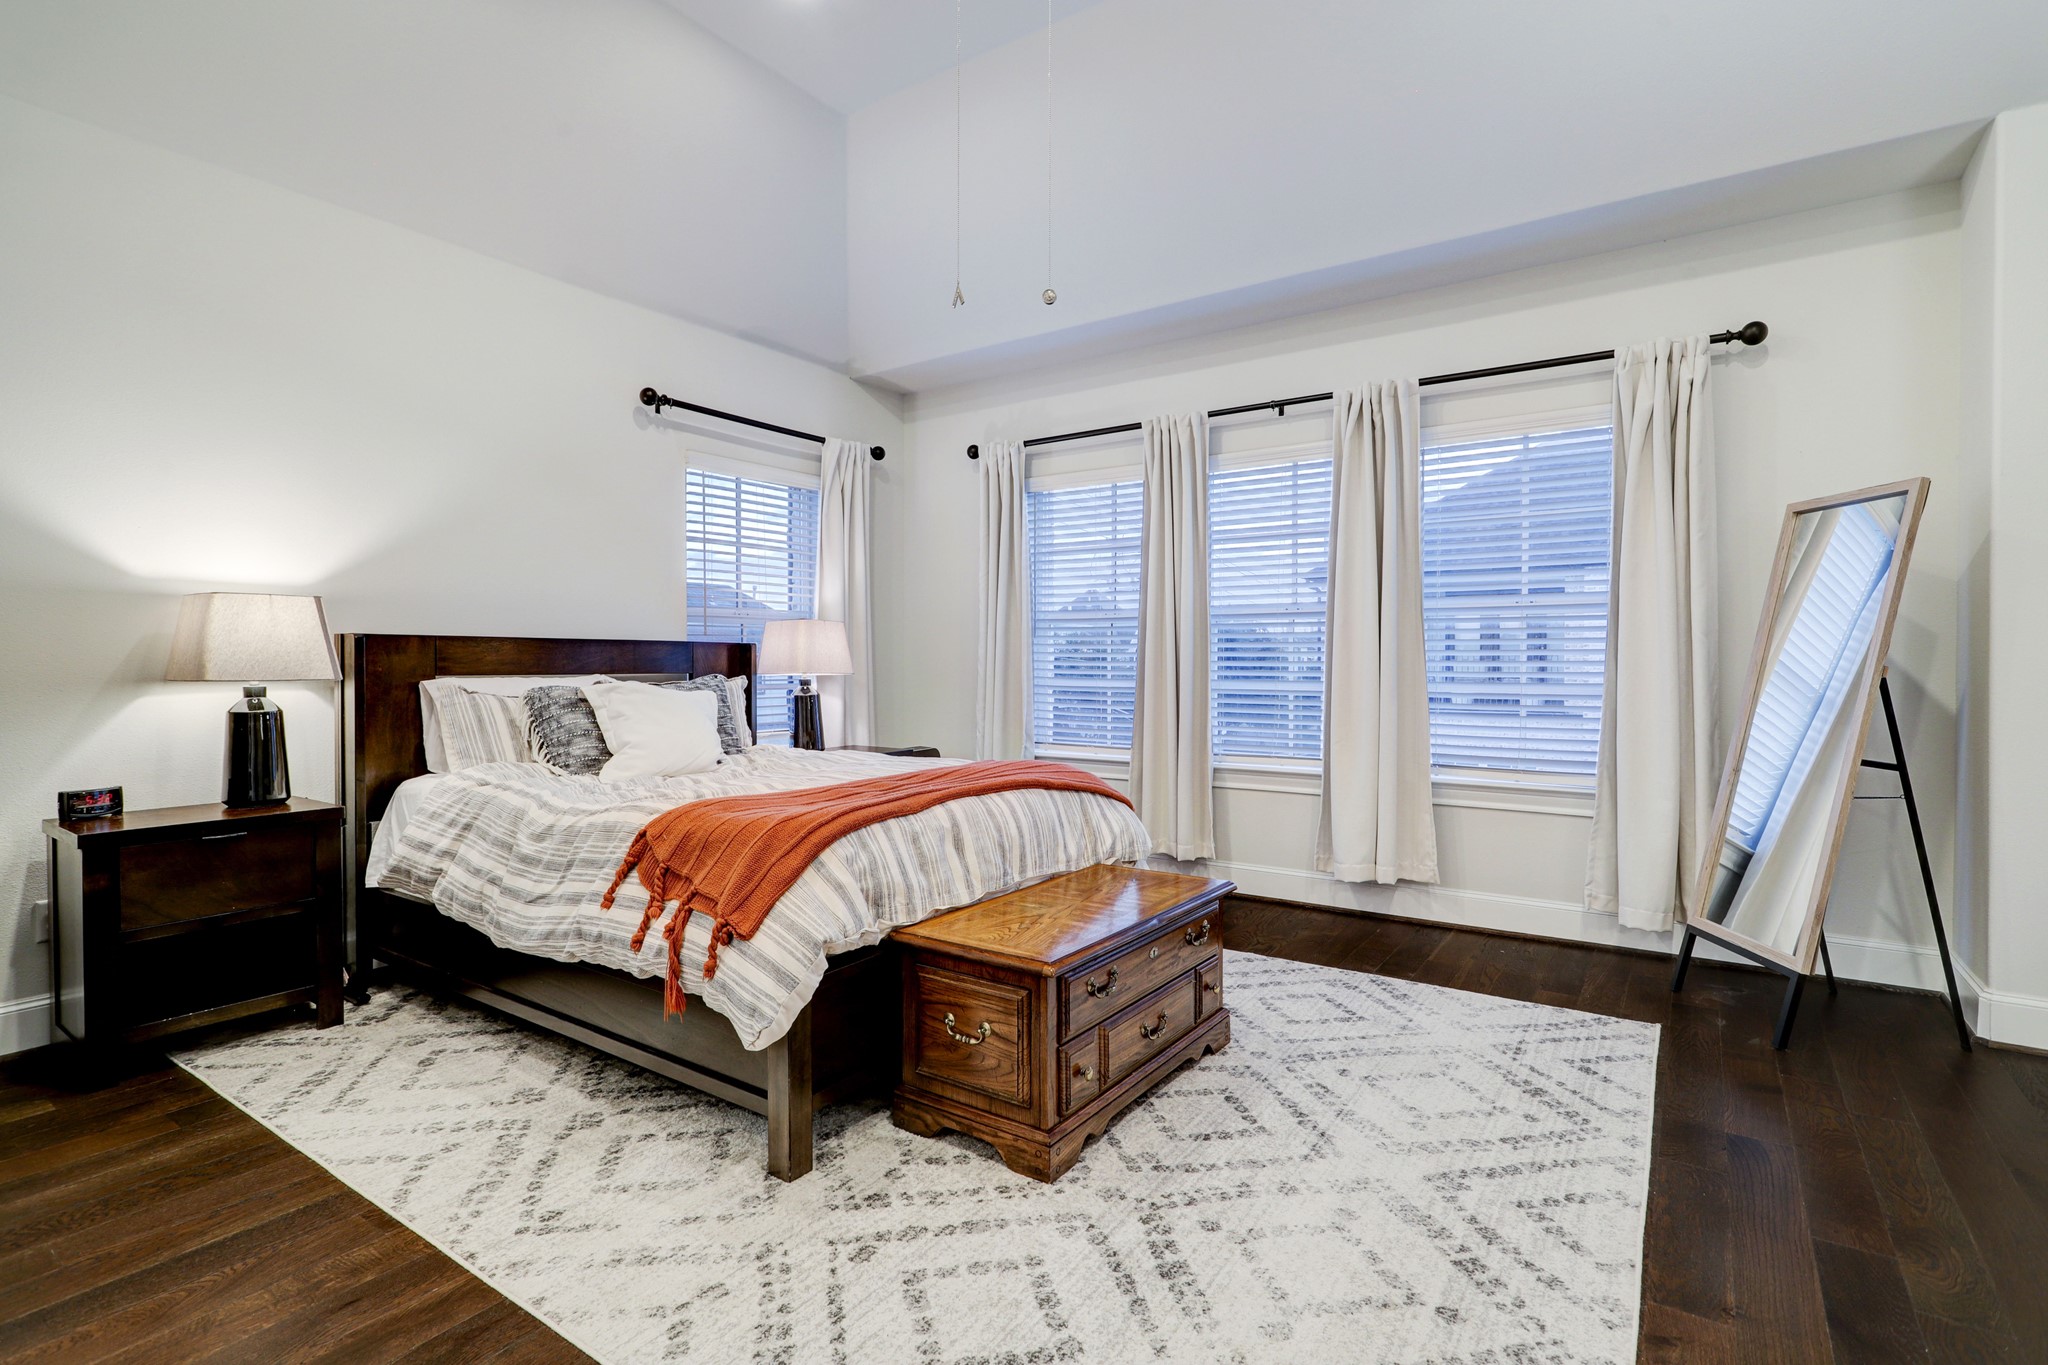 Abundant space can be found in the primary bedroom located on the 3rd floor with vaulted ceilings and engineered hardwood.